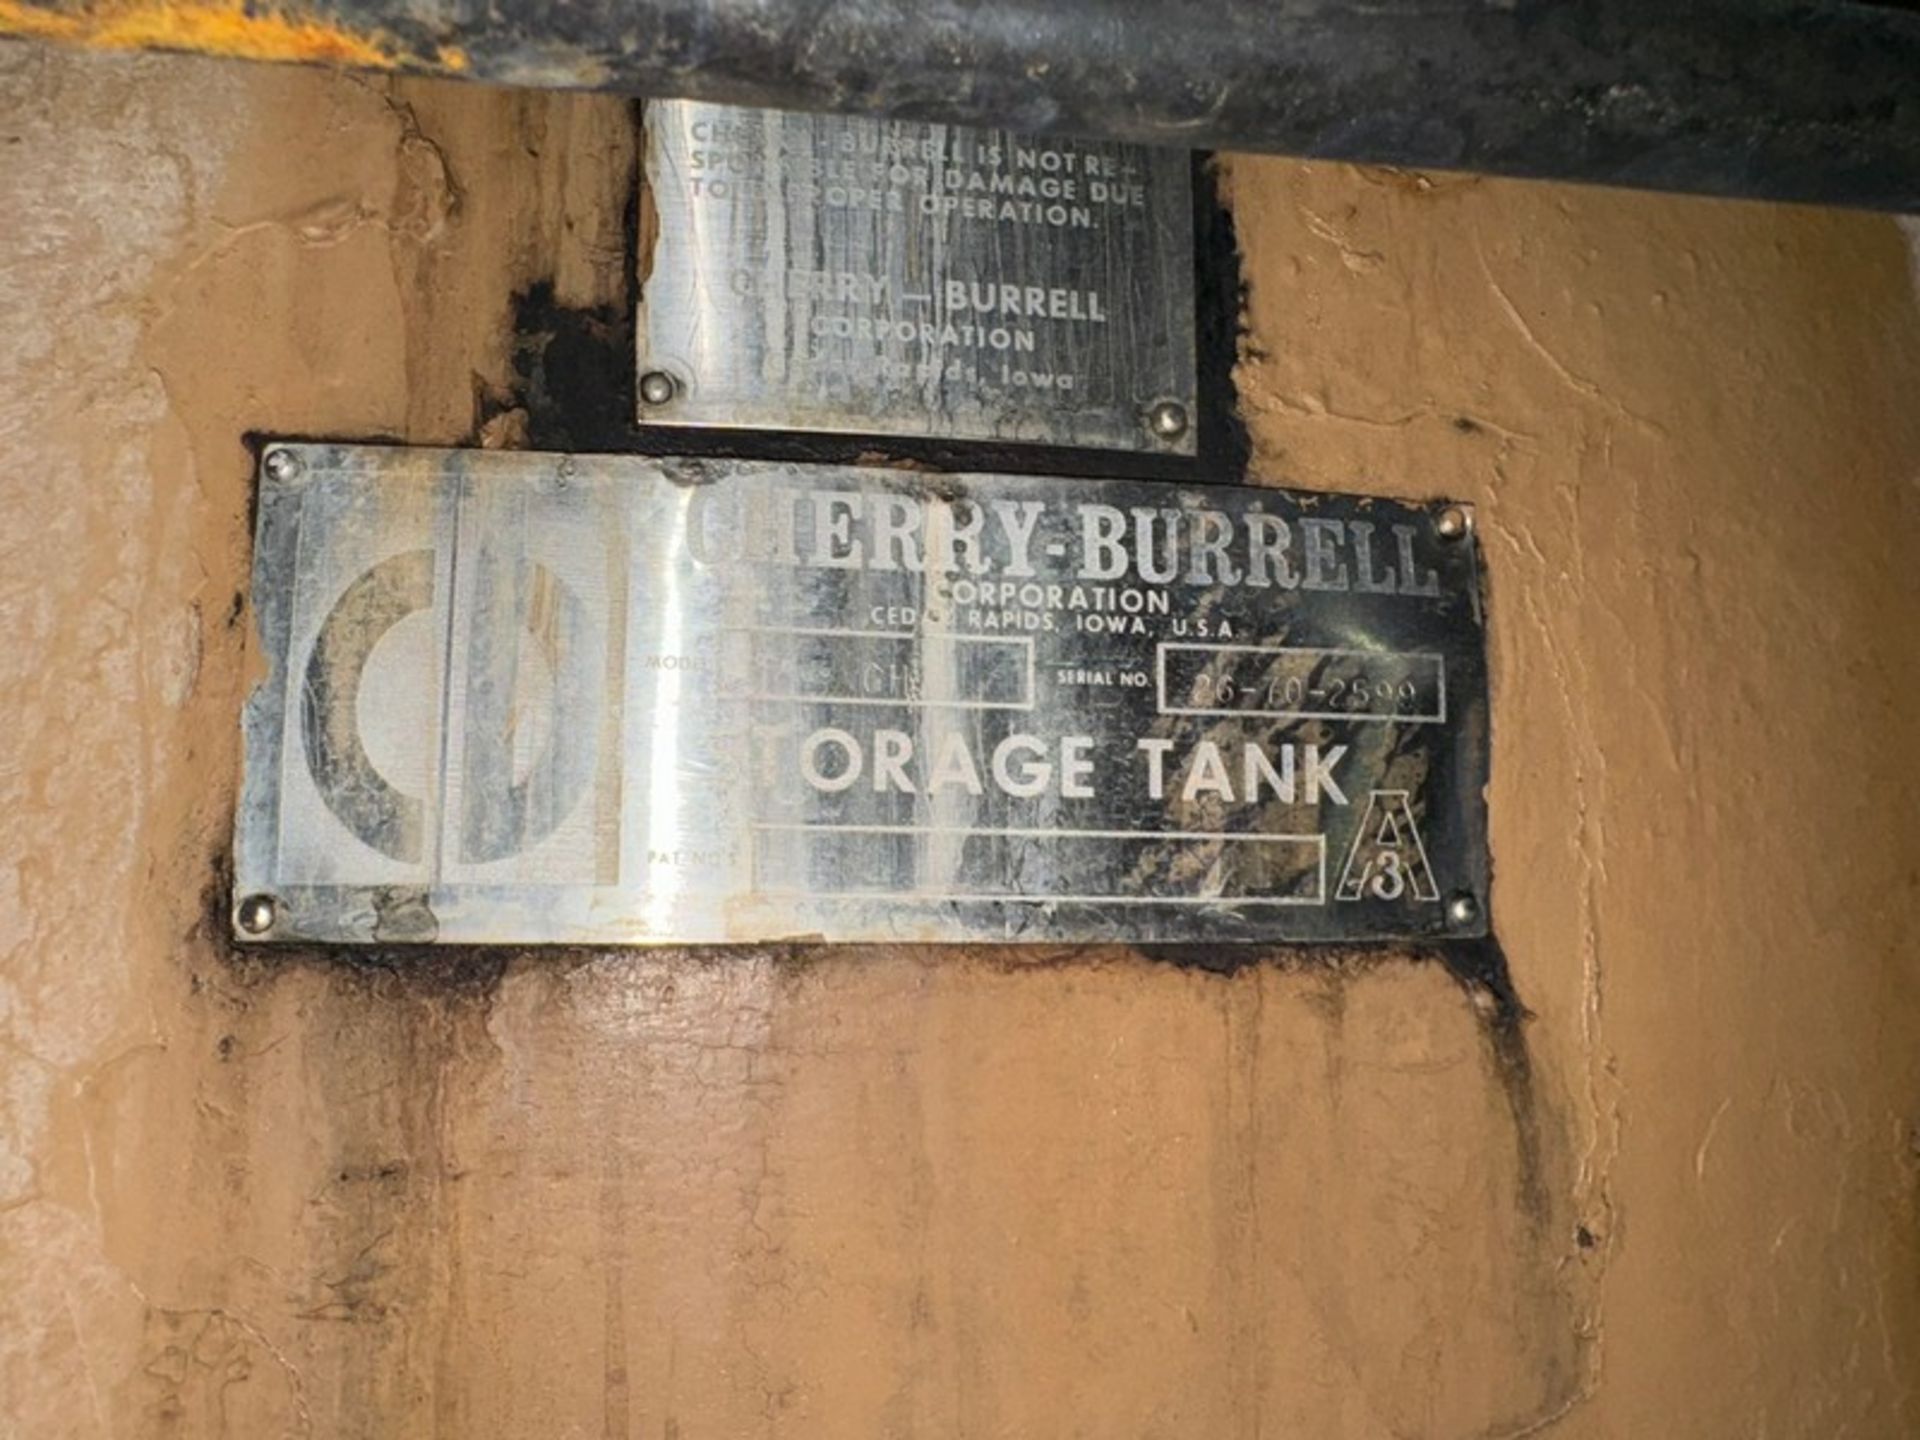 Cherry-Burrell Aprox. 2,500 Gal. S/S Single Wall Tank, M/N GH, S/N 26-70-2599, with Front Man - Image 3 of 8